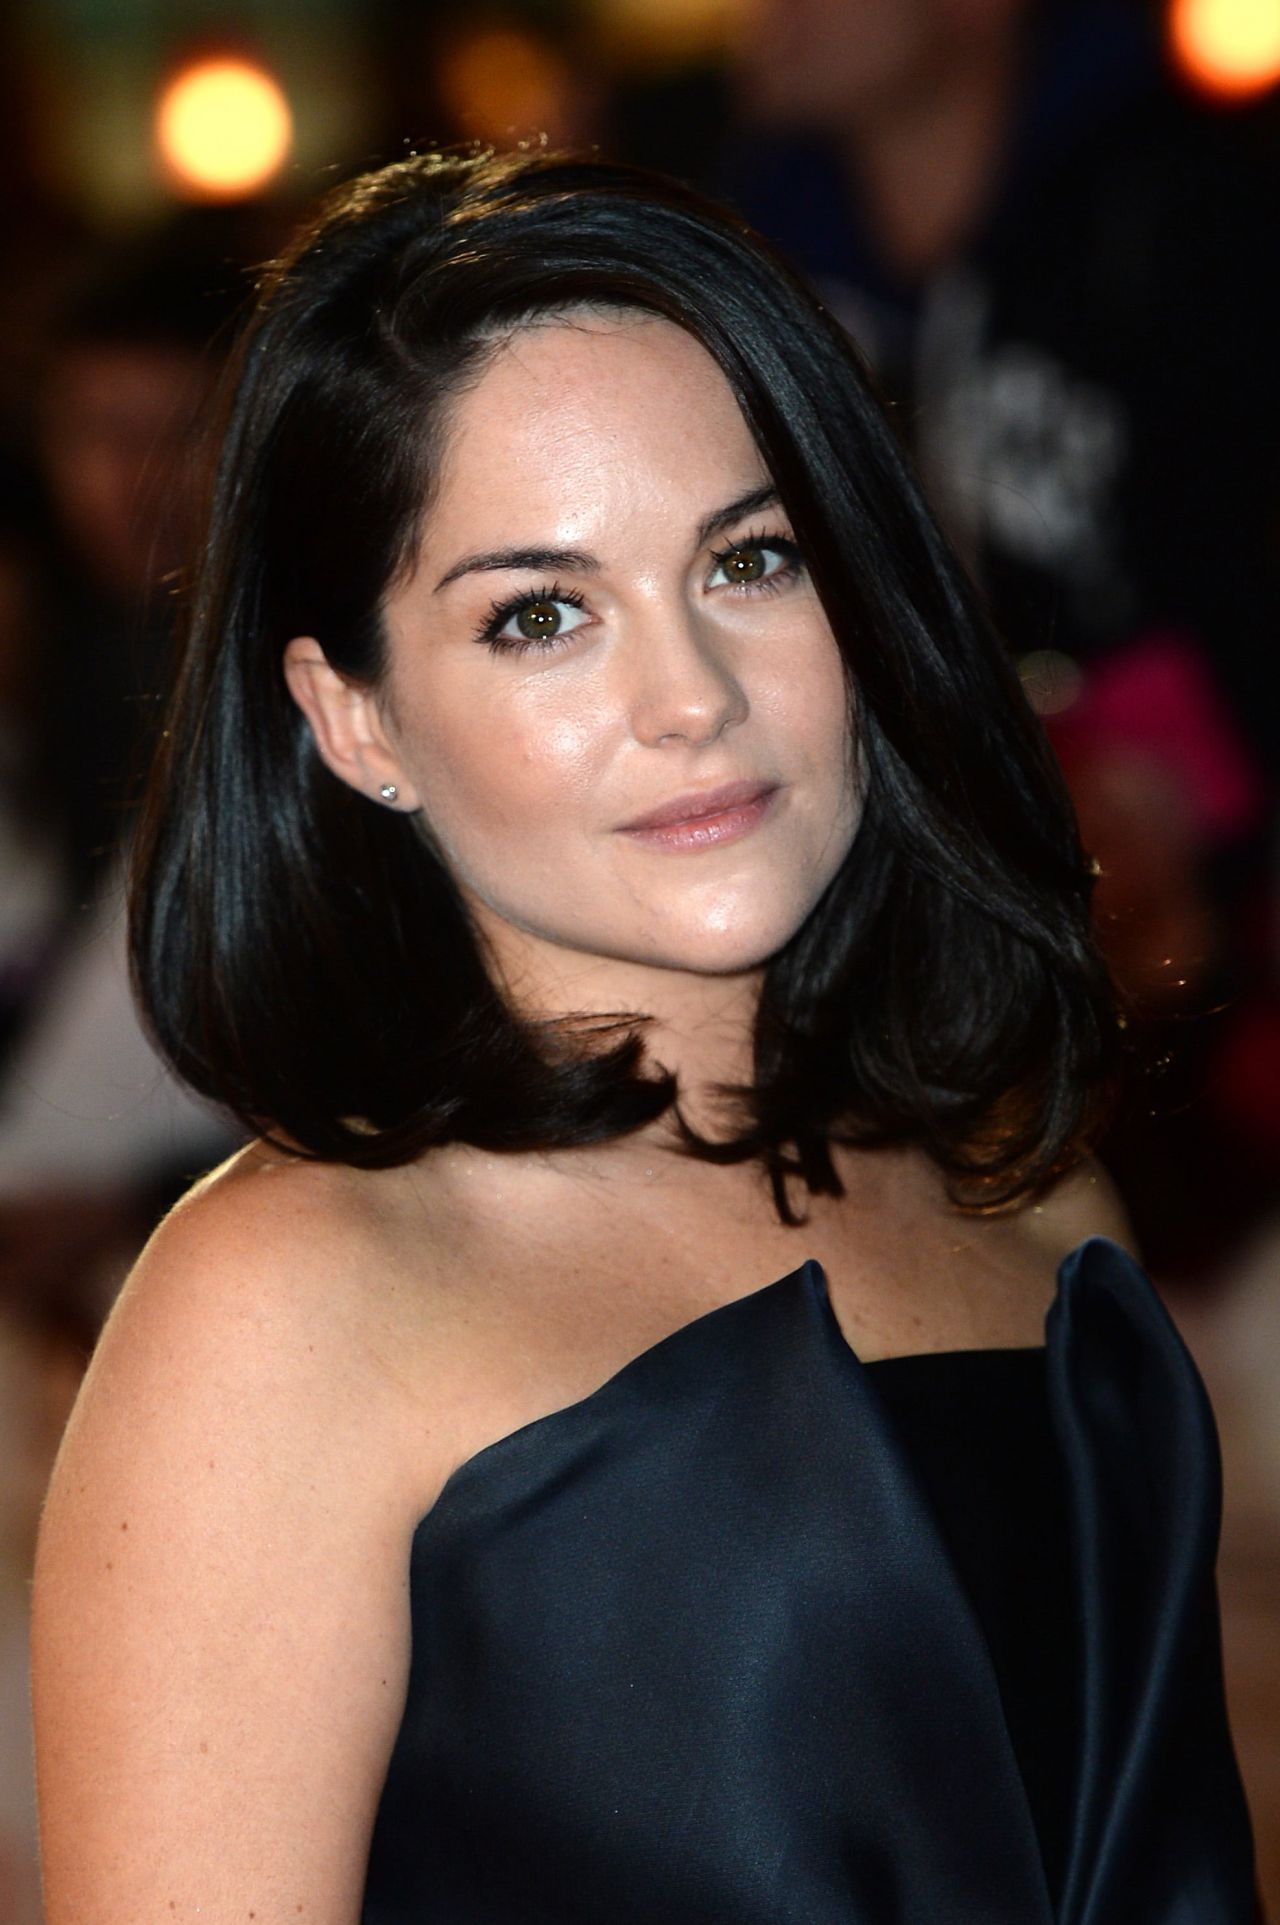 Sarah Greene attends the UK Premiere of 'Burnt' at Vue West End on October 28, 2015 in London, England.